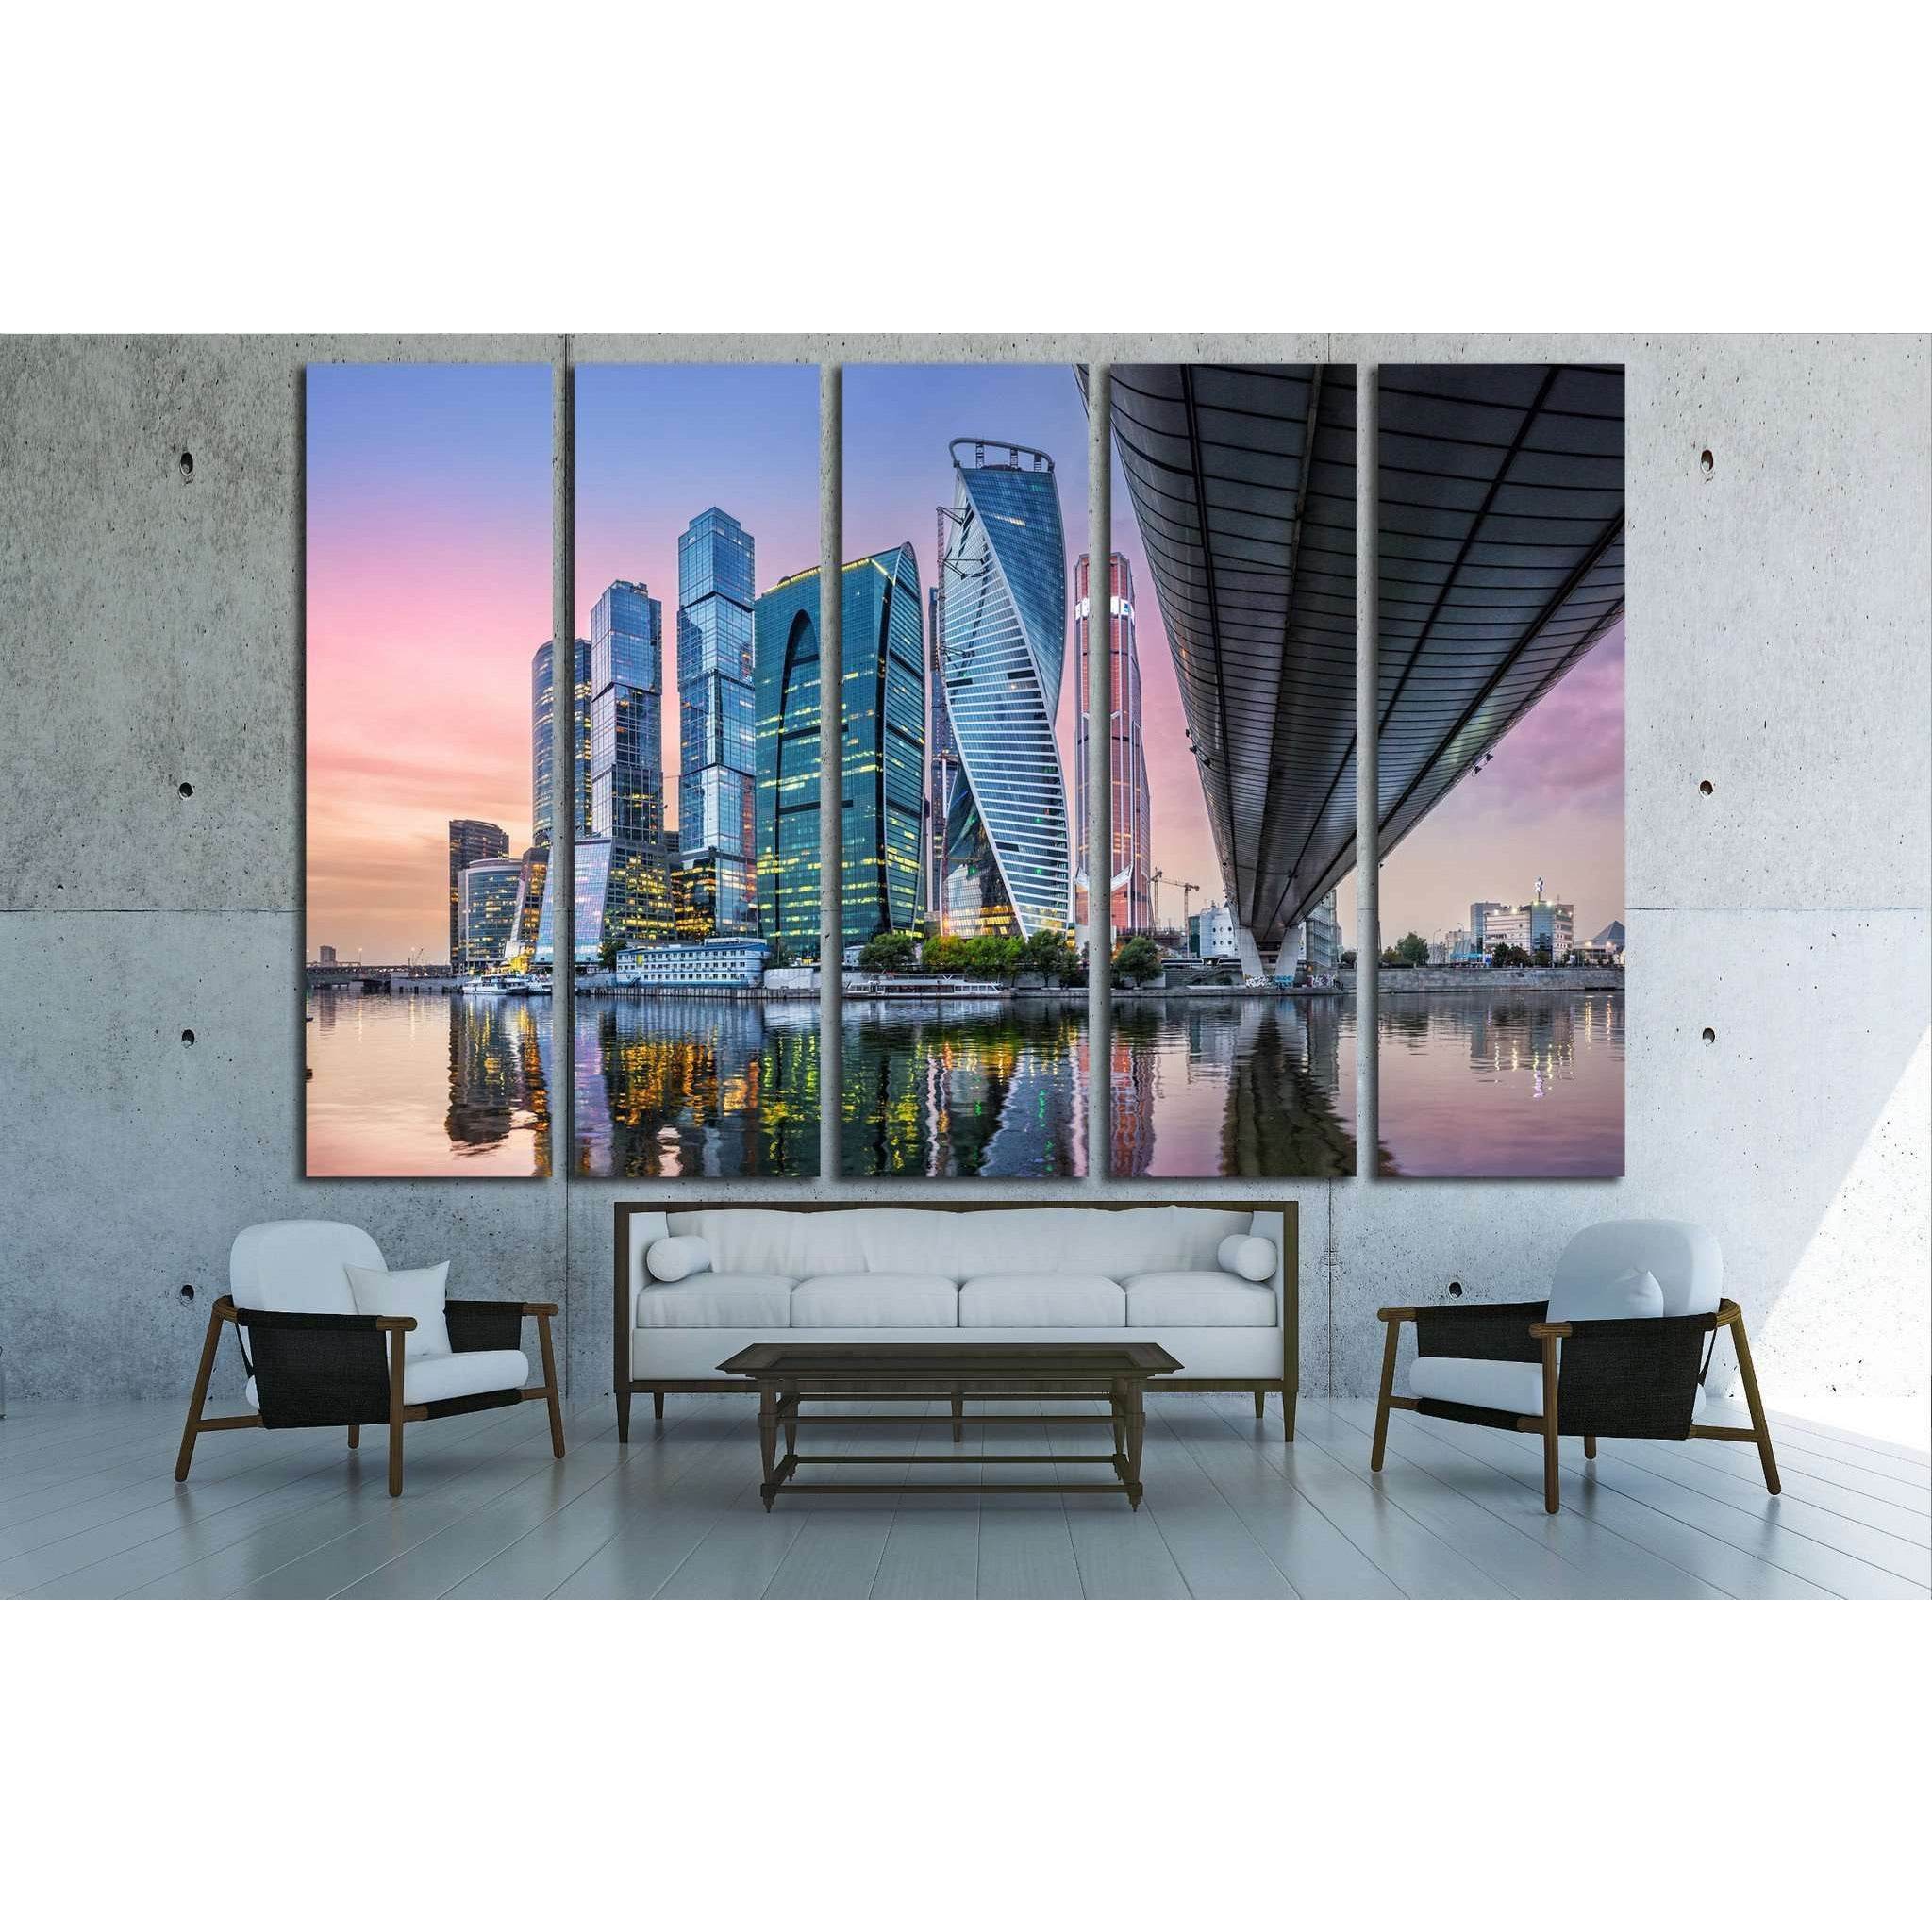 Skyscrapers in Moscow-City №1560 Ready to Hang Canvas Print